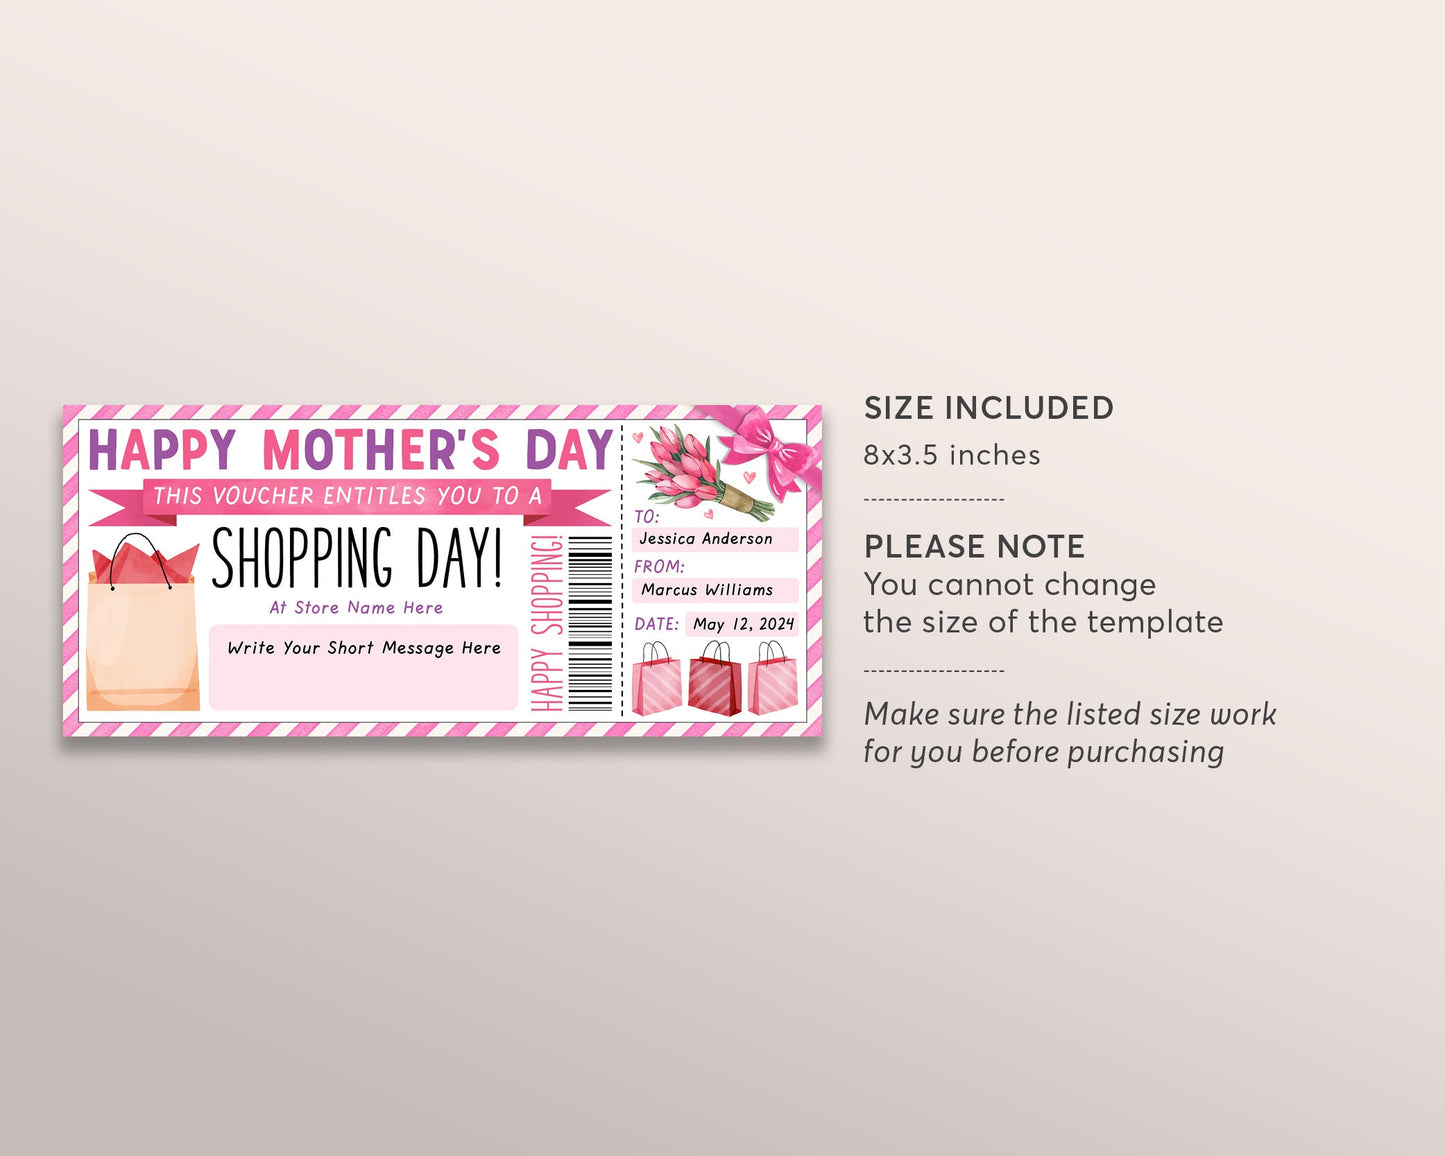 Mothers Day Shopping Spree Gift Certificate Editable Template, Surprise Shopping Day Trip Voucher Ticket For Mom From Daughter Son Ideas